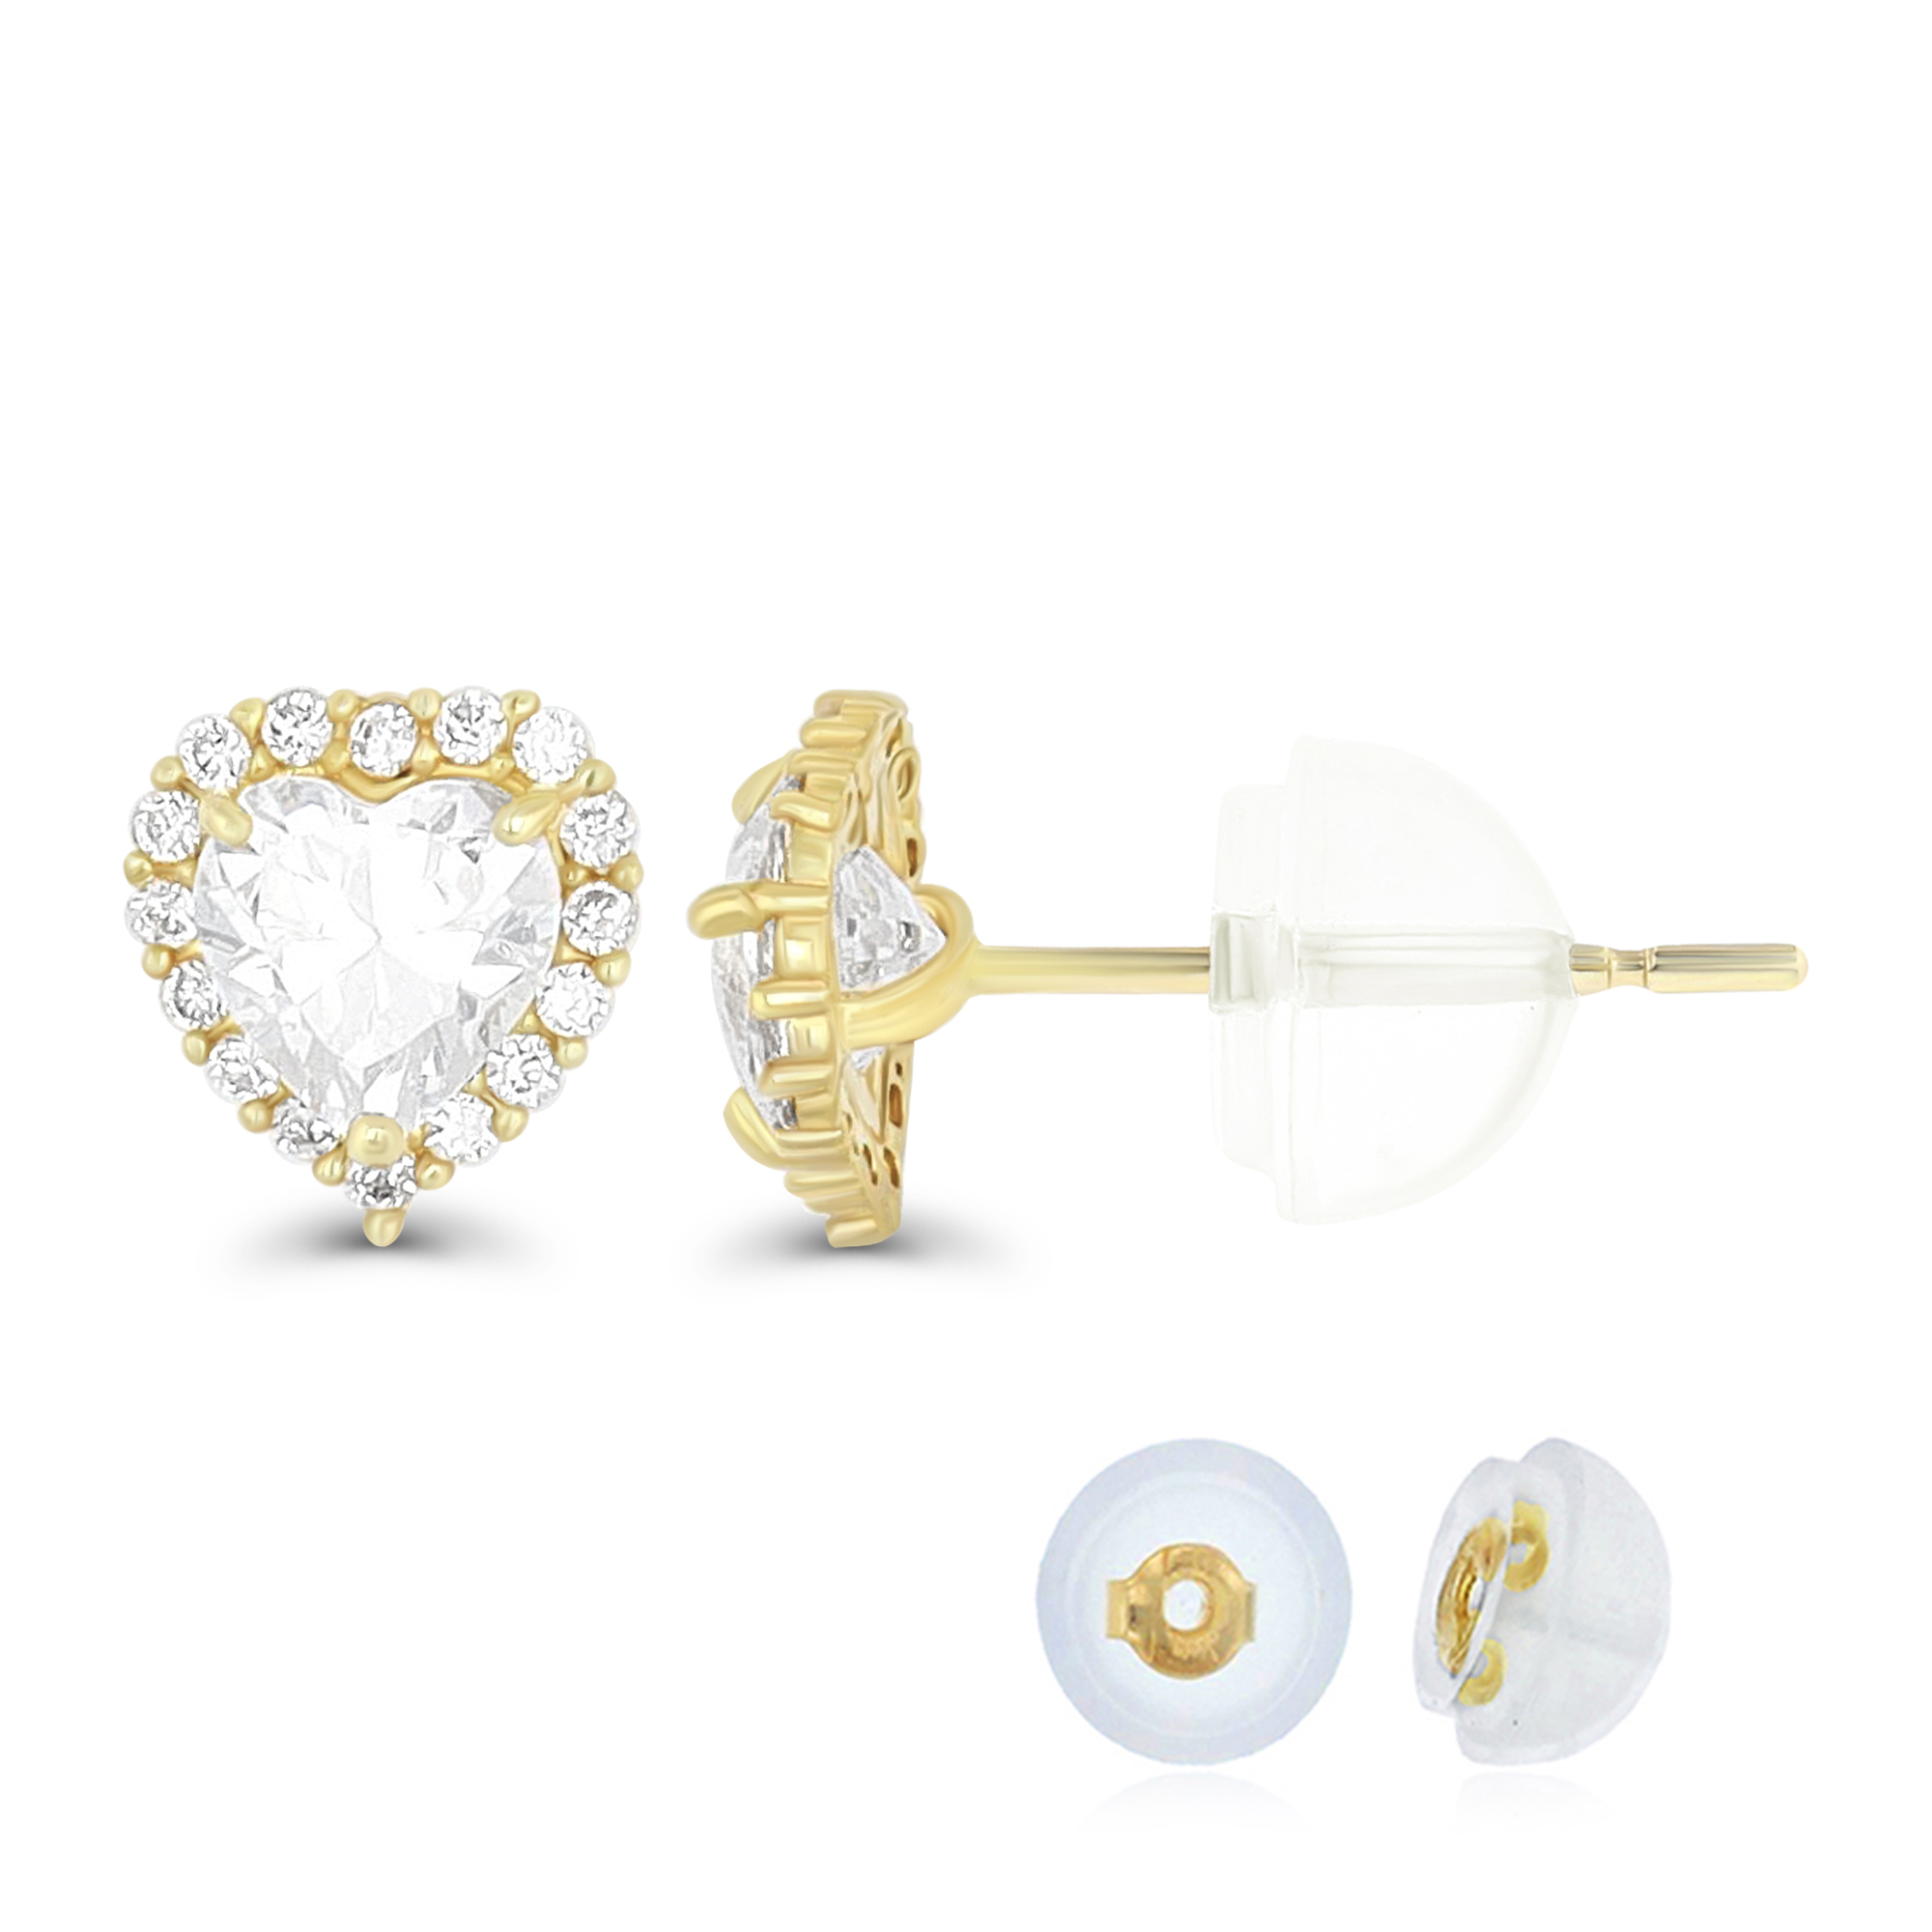 14K Yellow Gold Pave 5X5mm Heart White Swarovski Zirconia Halo Stud Earring with Bubble Silicone Back